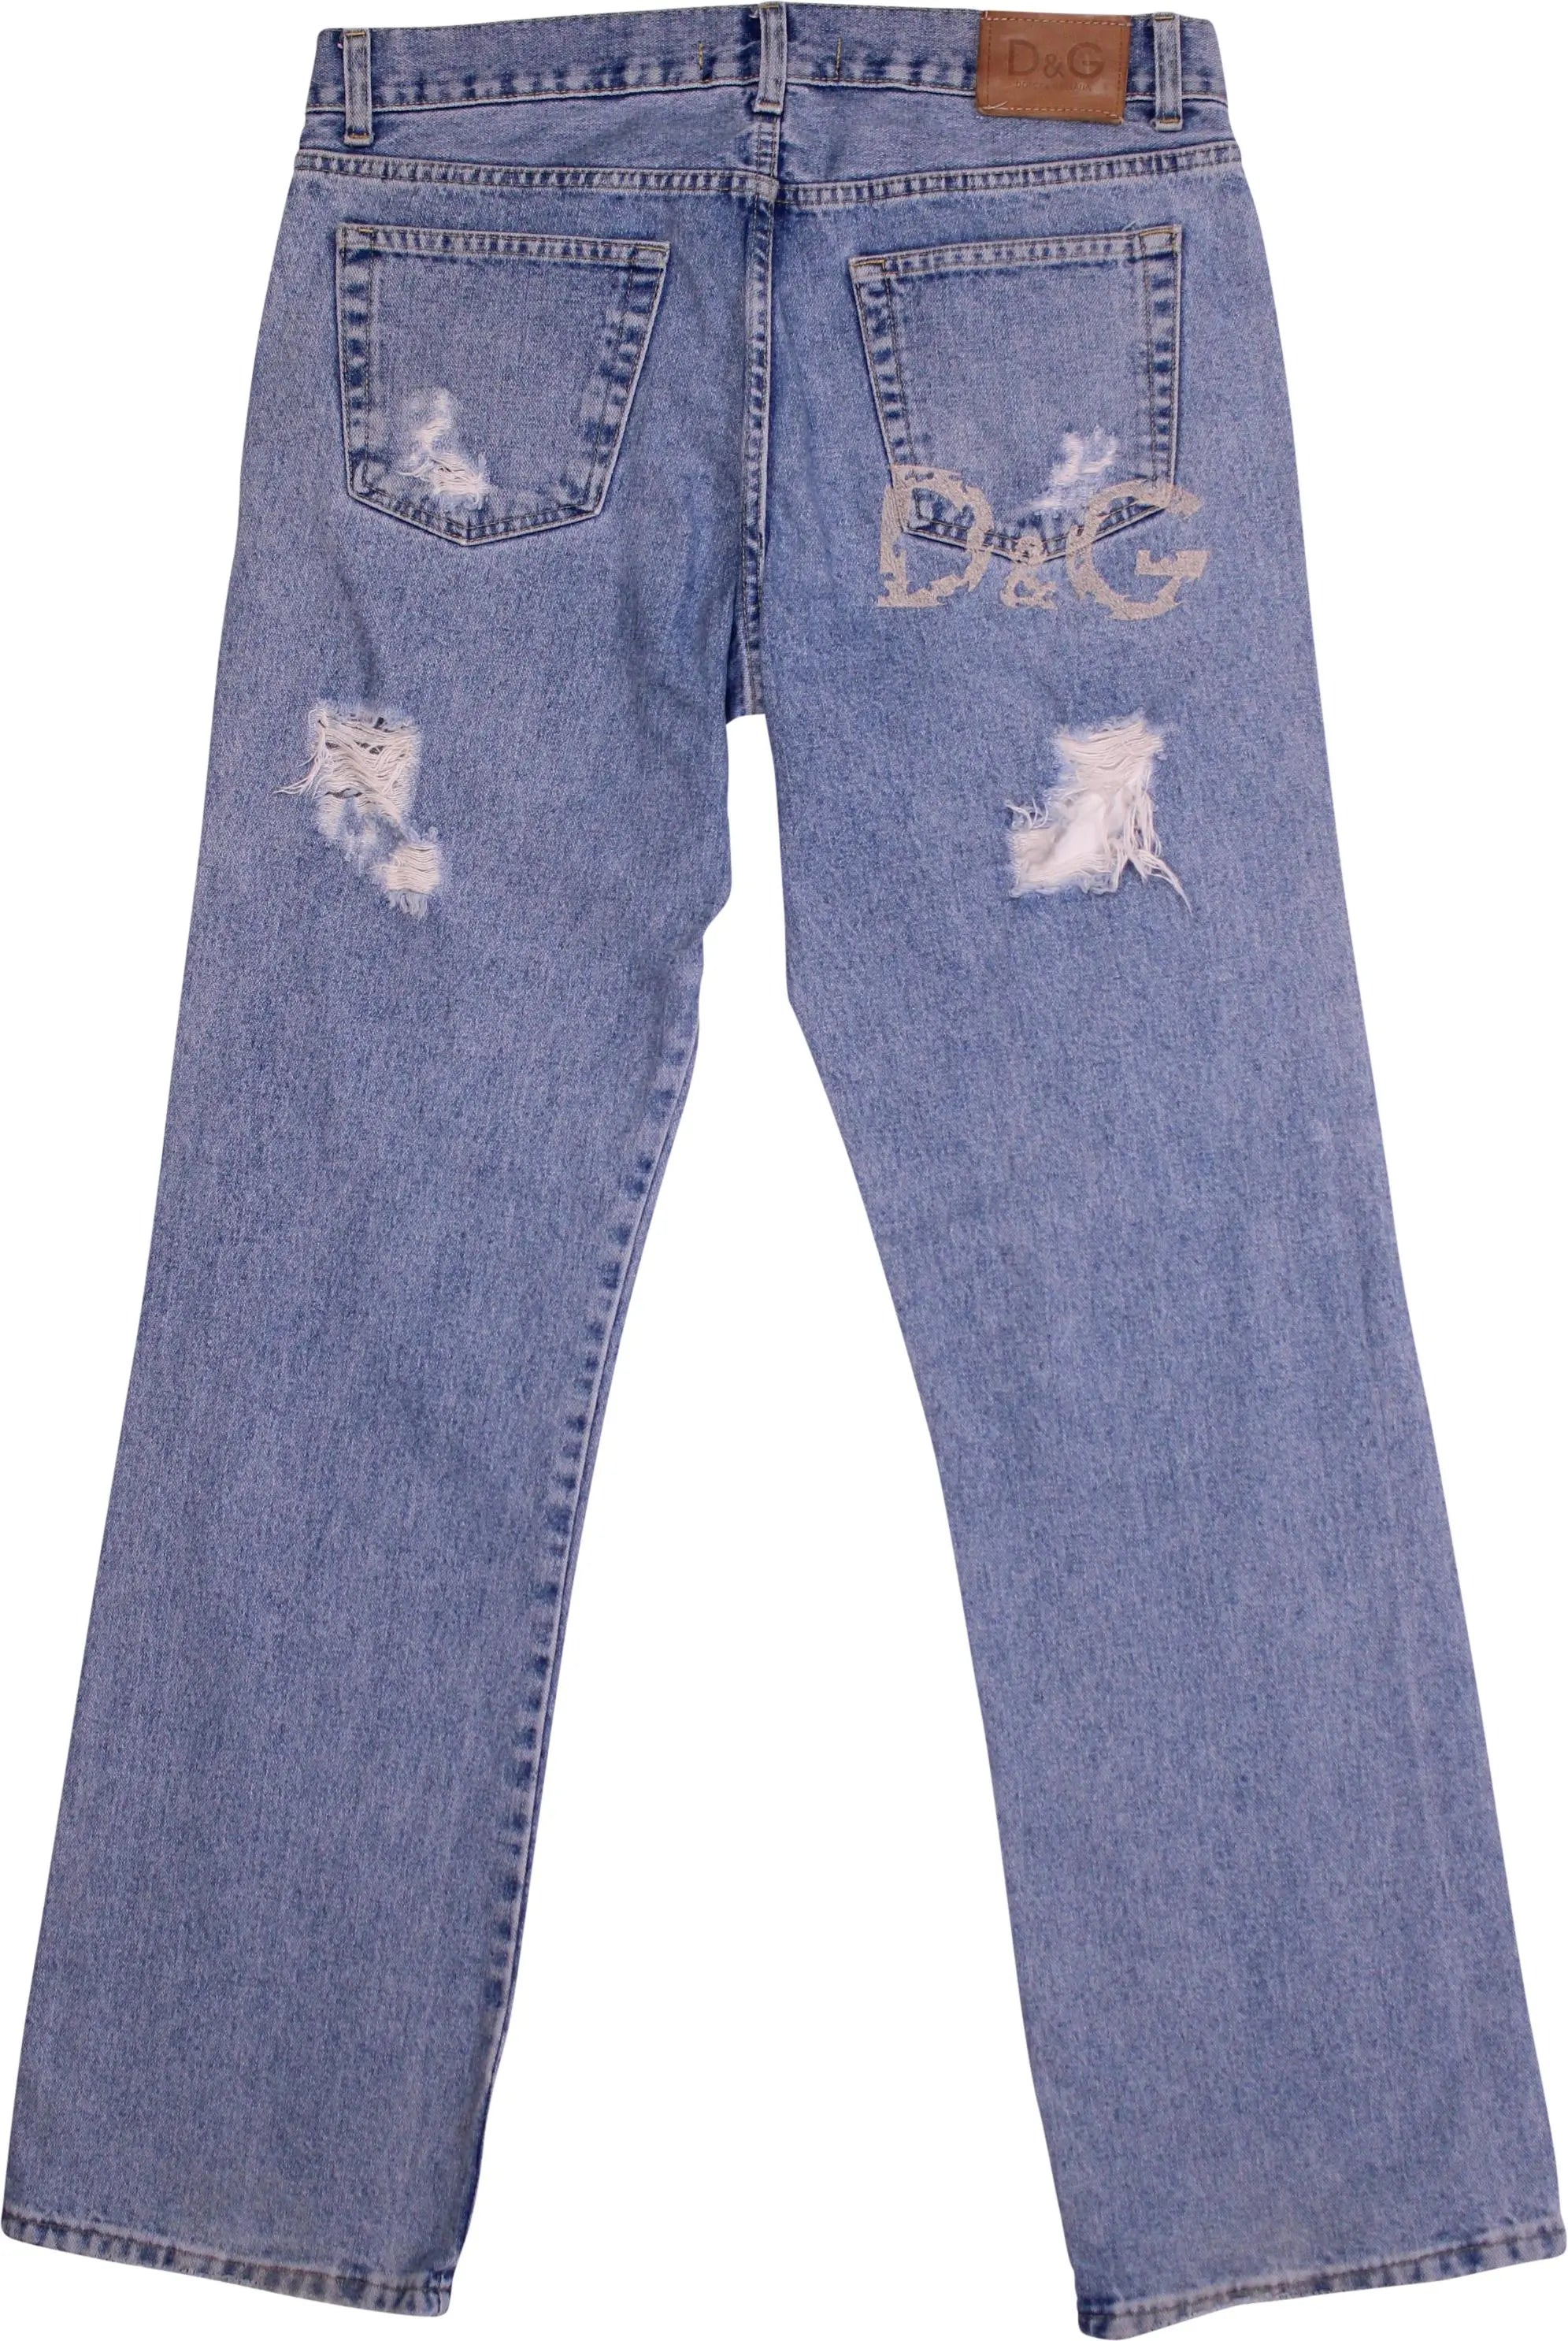 Dolce & Gabbana - Dolce & Gabbana Distressed Jeans- ThriftTale.com - Vintage and second handclothing